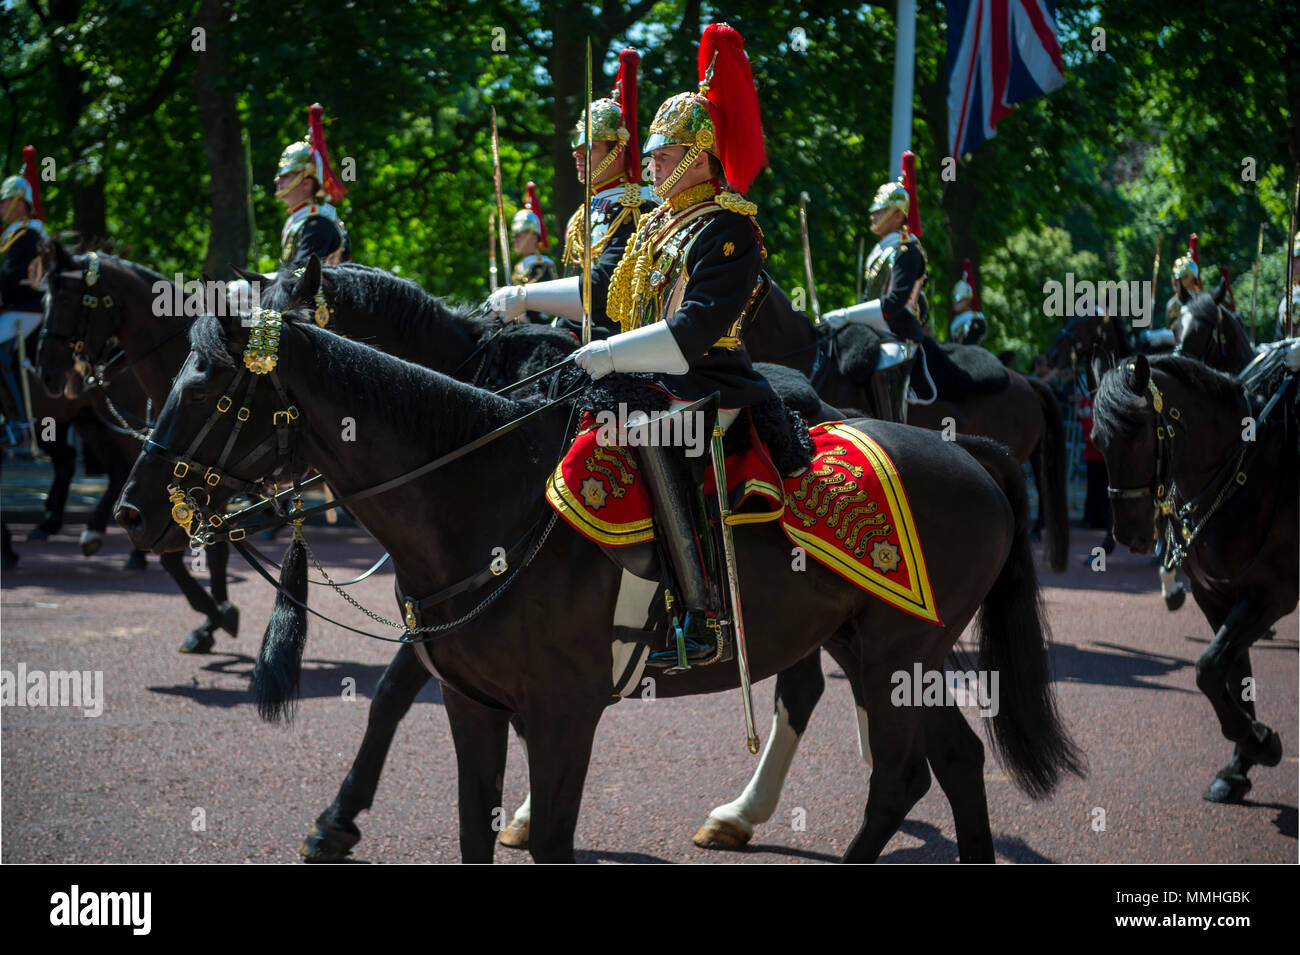 LONDON - JUNE 17, 2017: Royal guards on horseback dressed in ceremonial uniform pass down the Mall. Stock Photo